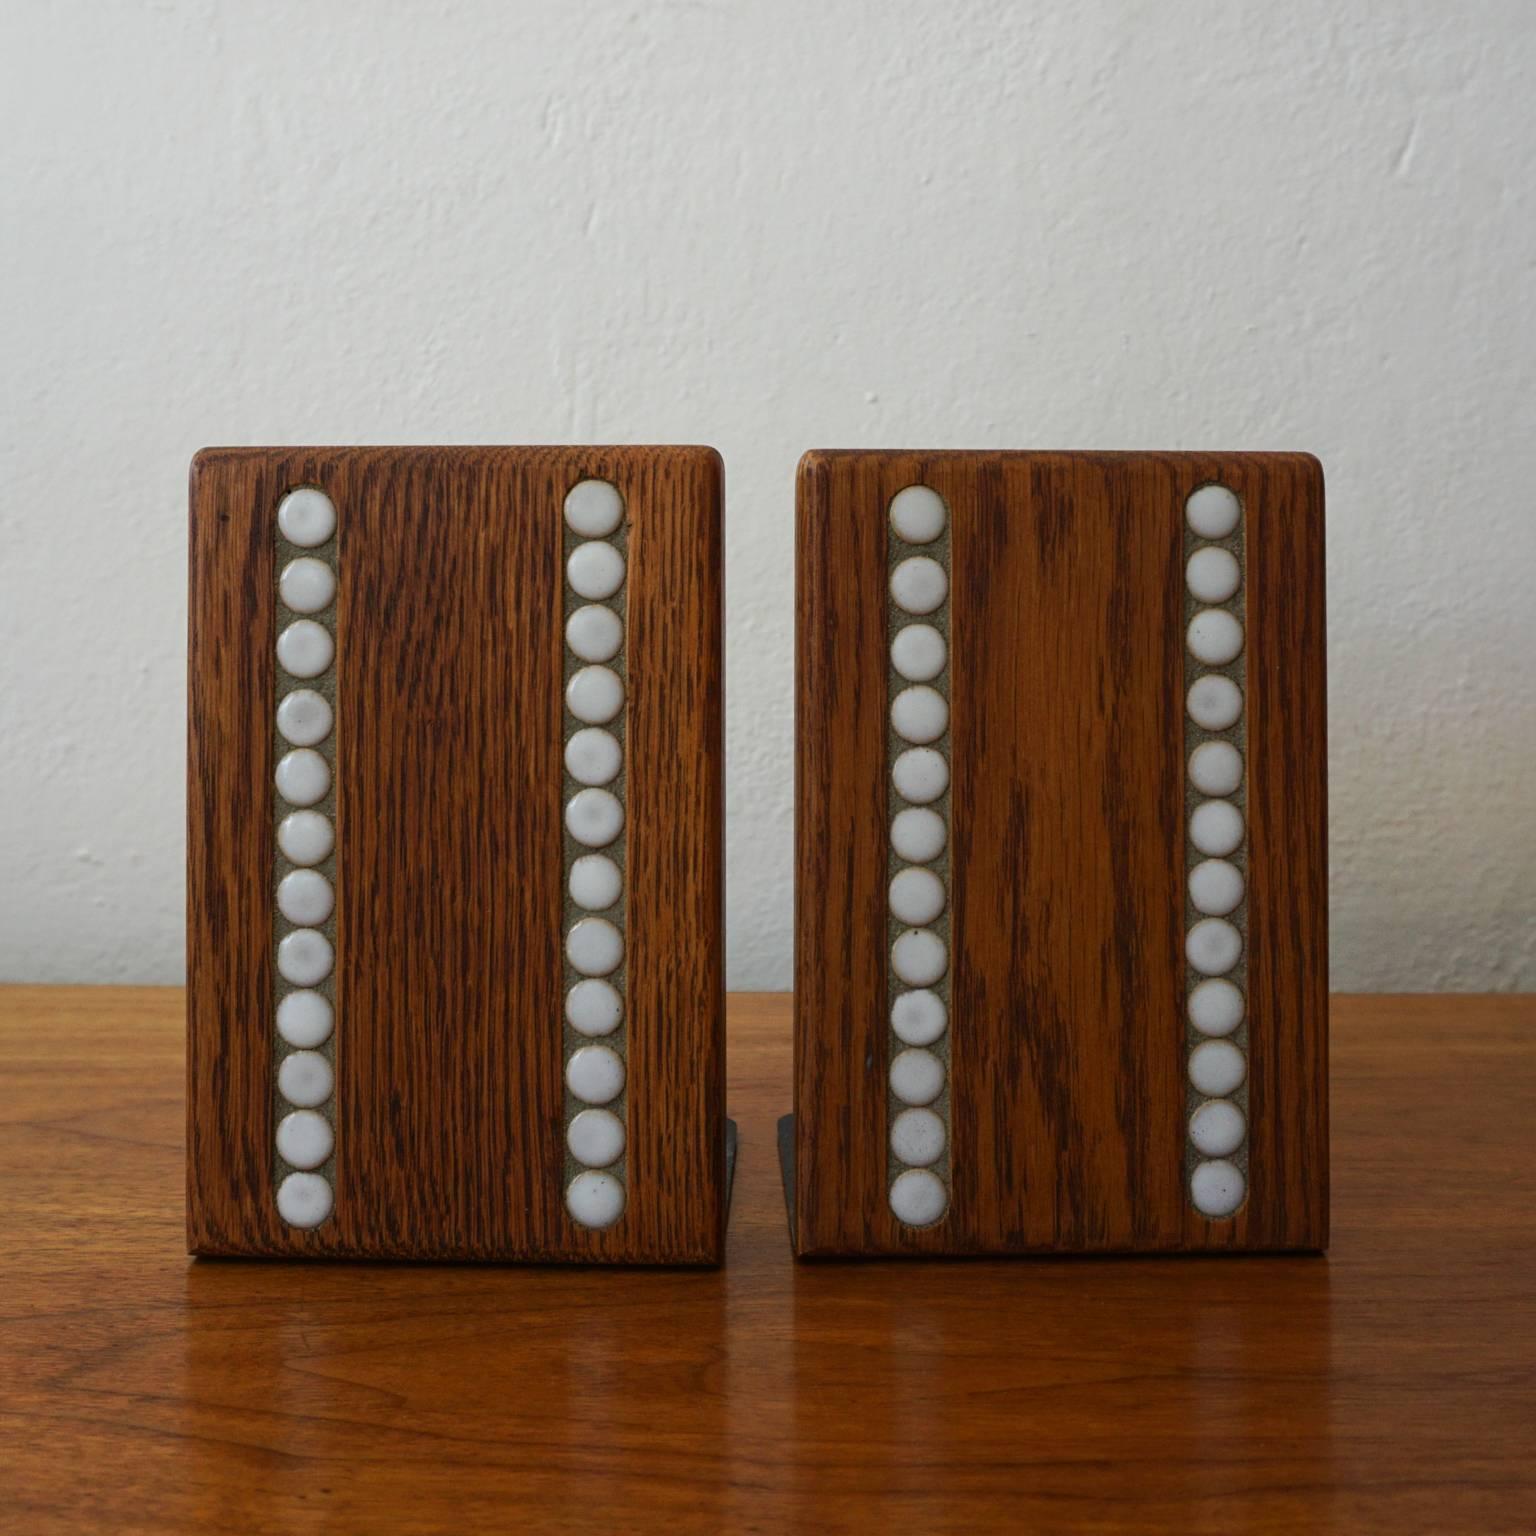 Bookends with ceramic tile by Jane and Gordon Martz for their company, Marshall Studios.